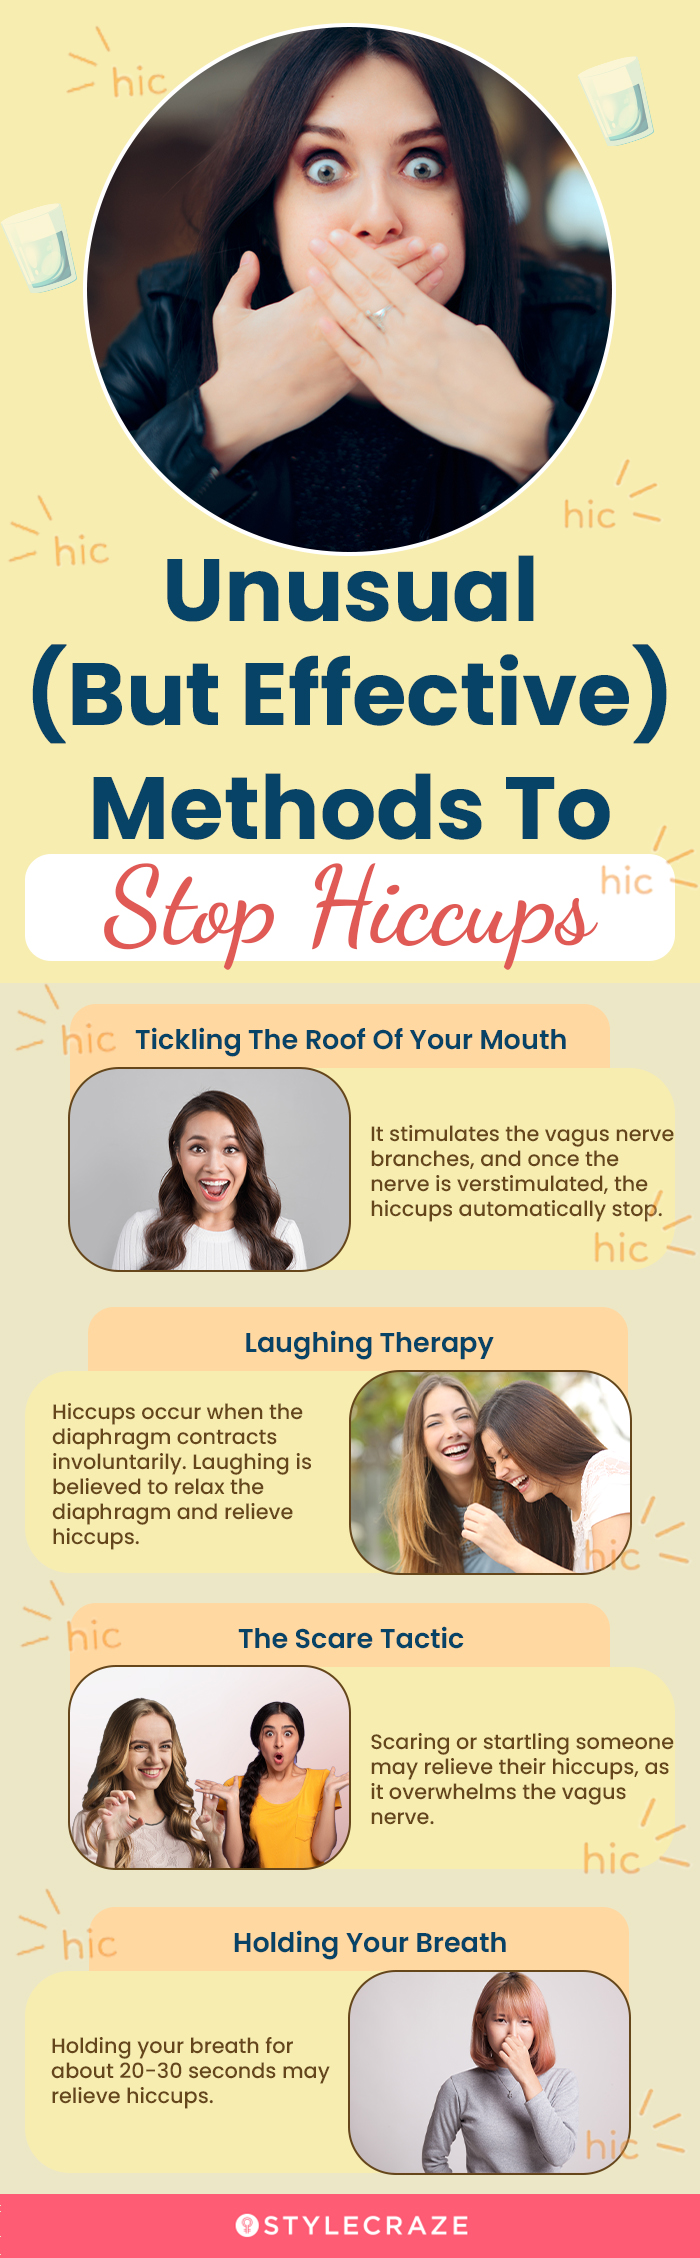 unusual (but effective) methods to stop hiccups (infographic)